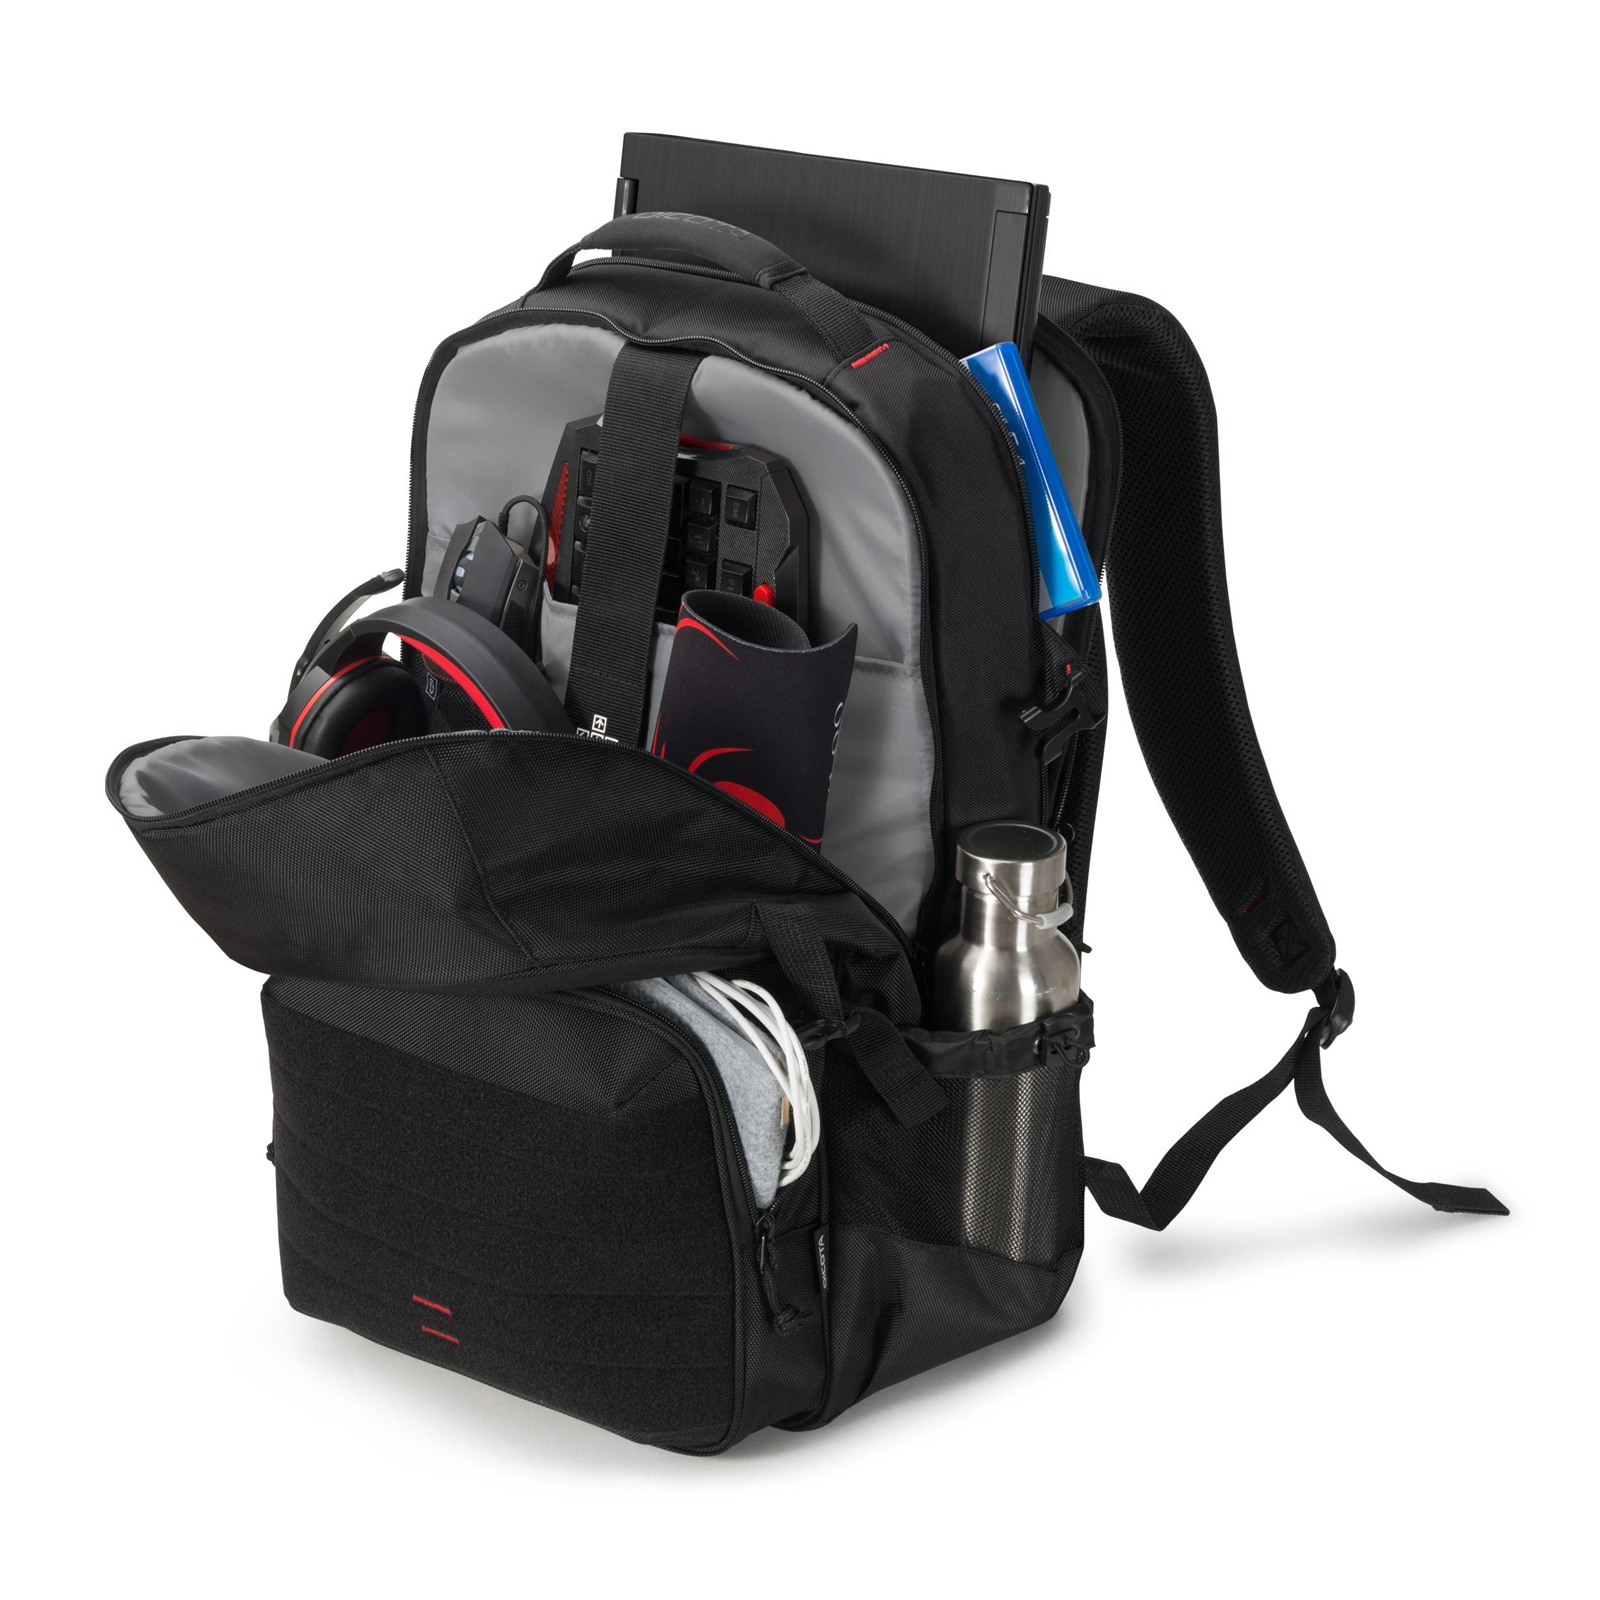 Buy the Dicota HERO E-Sports Backpack 15.6"-17.3" inch Notebook /Laptop...  ( D31714 ) online - PBTech.com/pacific